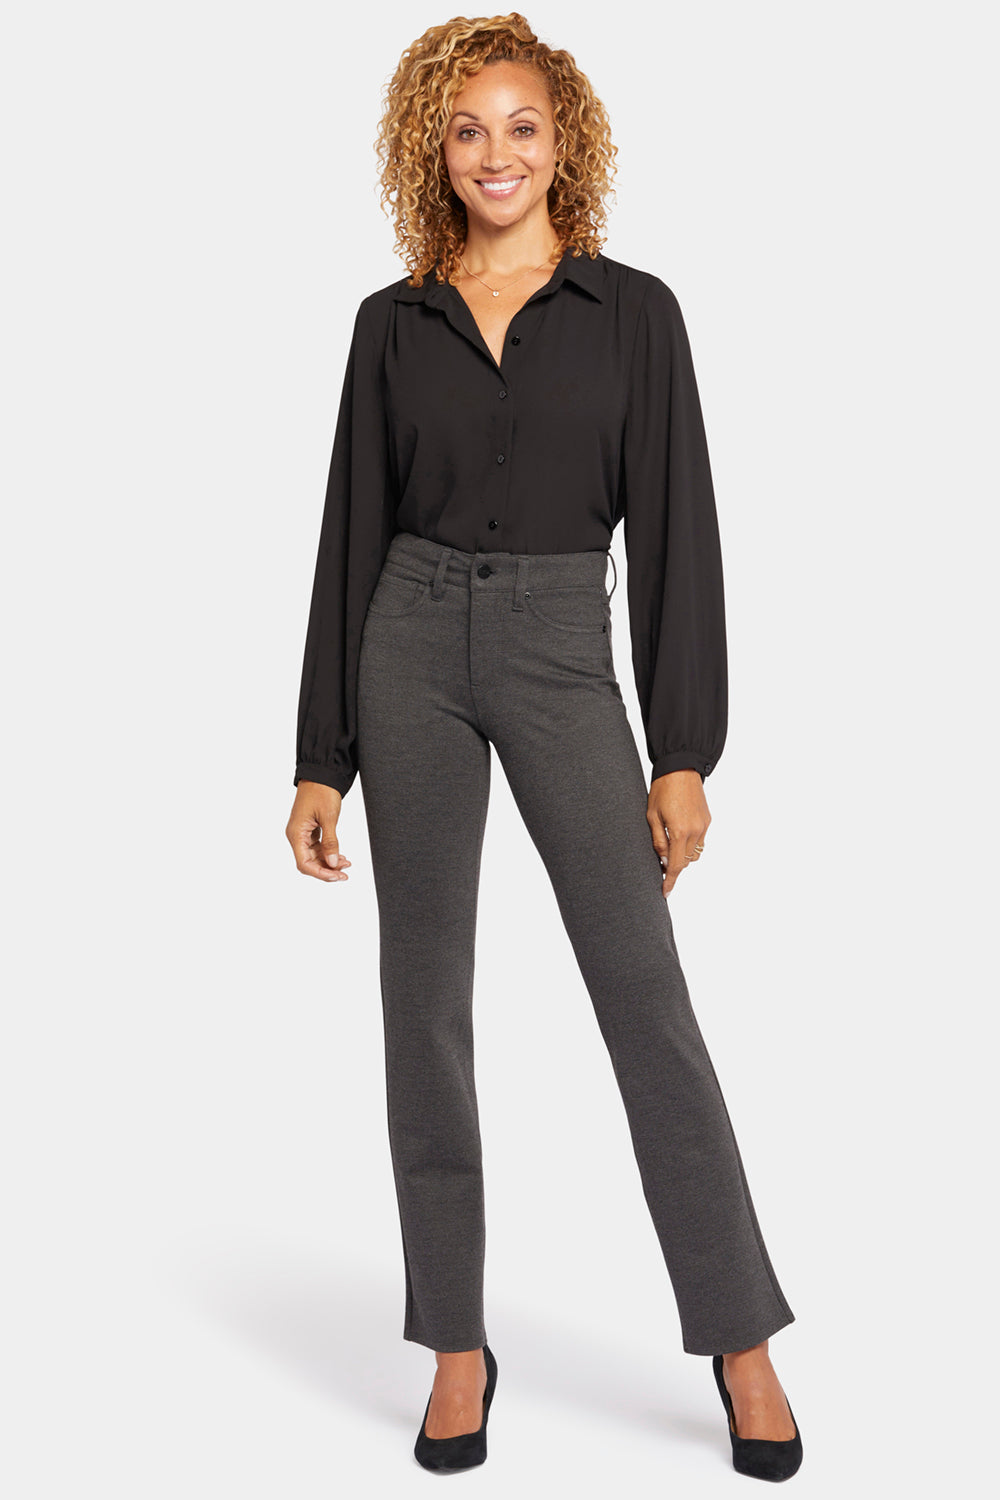 NYDJ Marilyn Straight Pants Sculpt-Her™ Collection - Charcoal Heathered